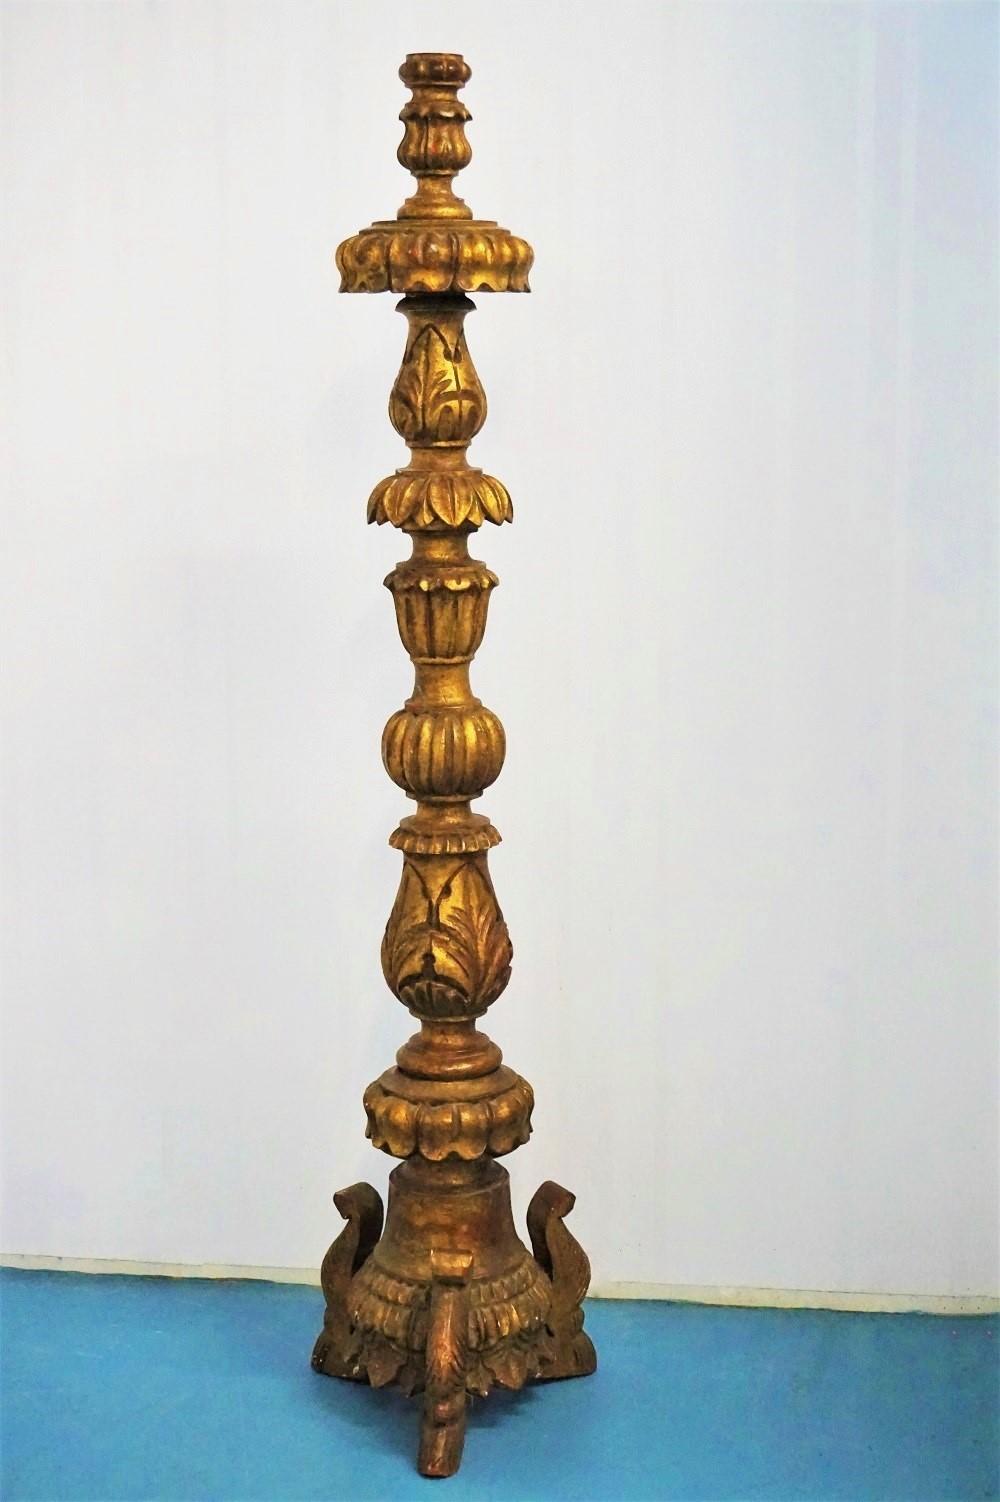 Tall early 18th century Portuguese gilt oak church torchère with deep foliate carvings on a tripod base.
This torchère can easily be converted into a floor lamp.
Measures: Height 54